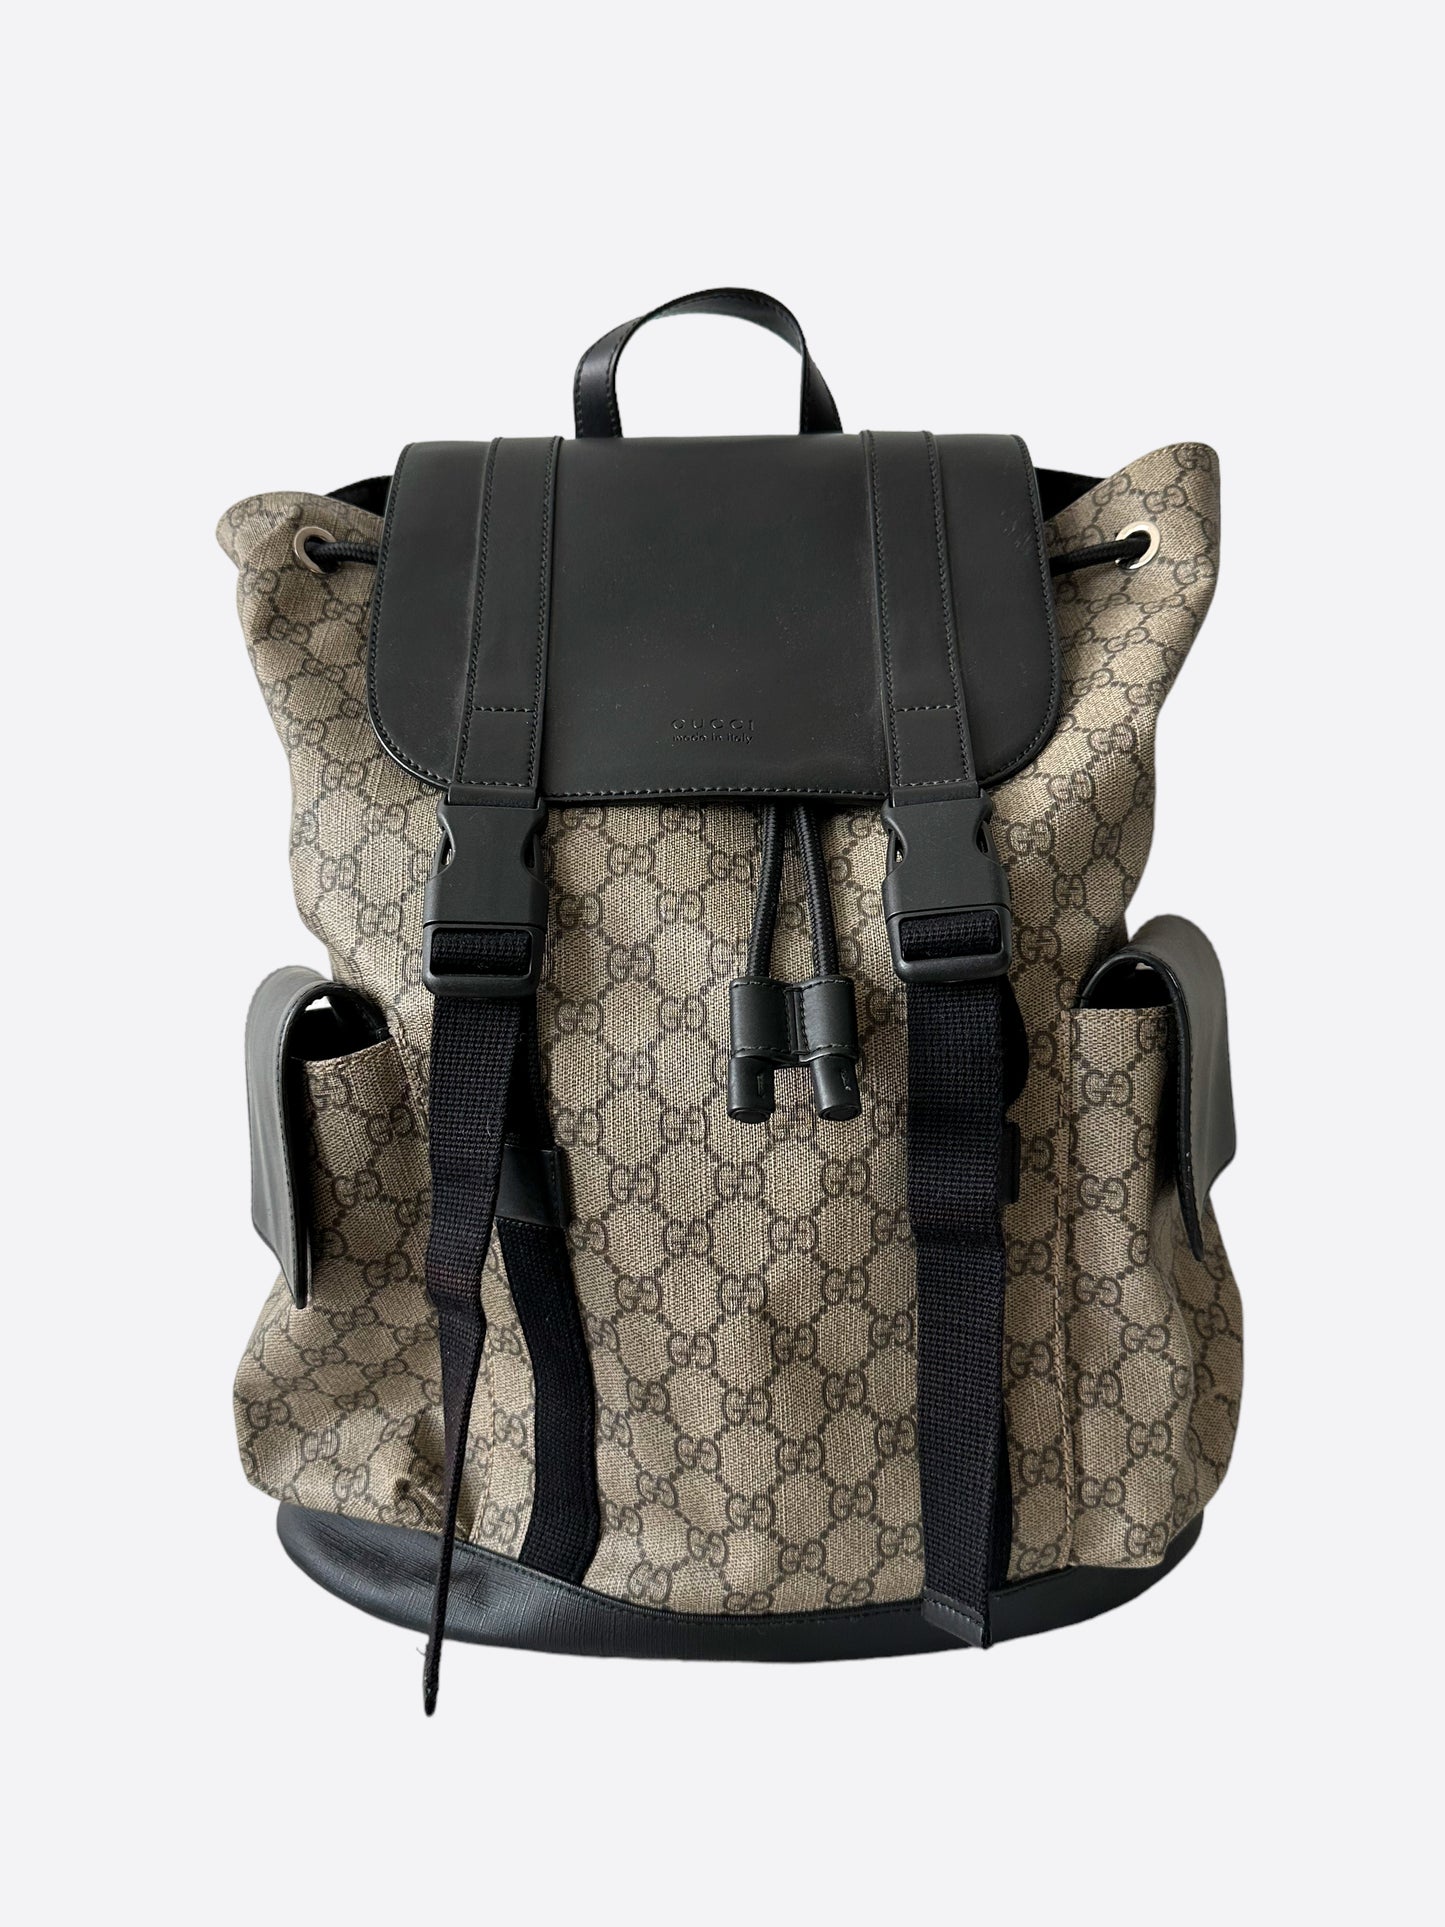 Gucci Leather GG Supreme Backpack